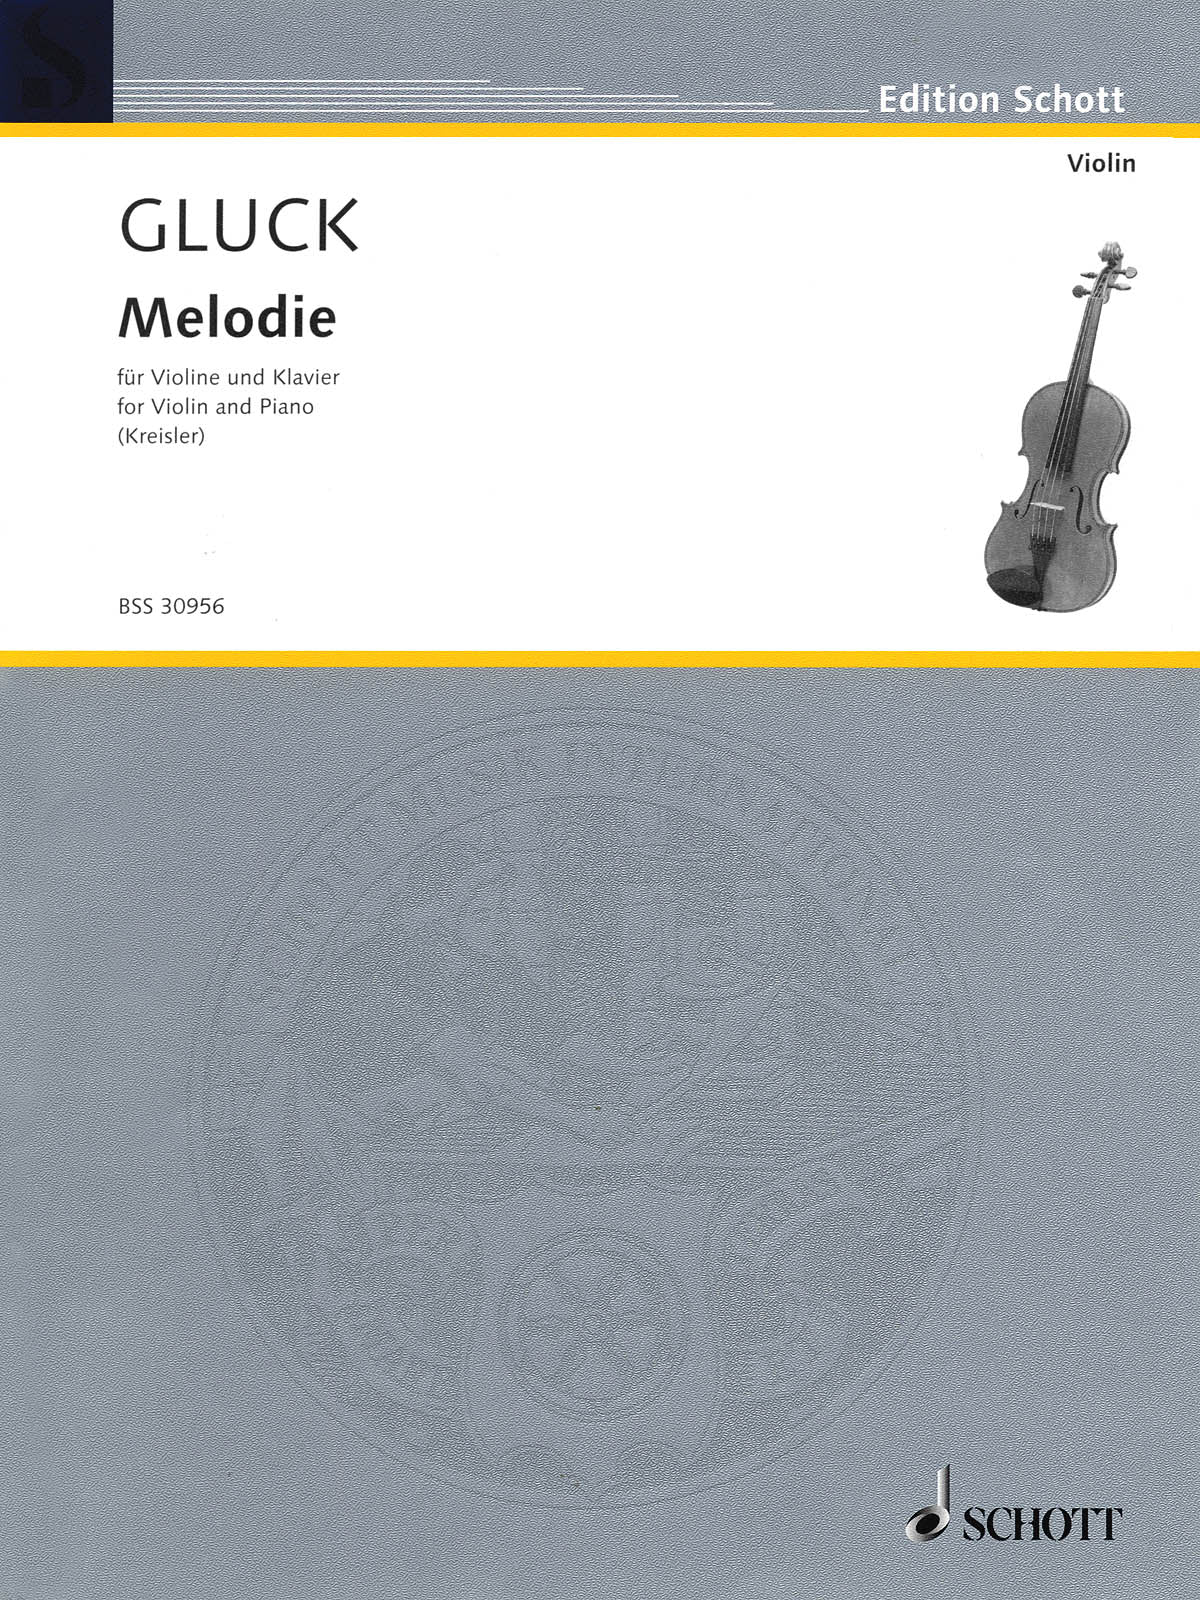 Gluck: Melodie (arr. for violin & piano)